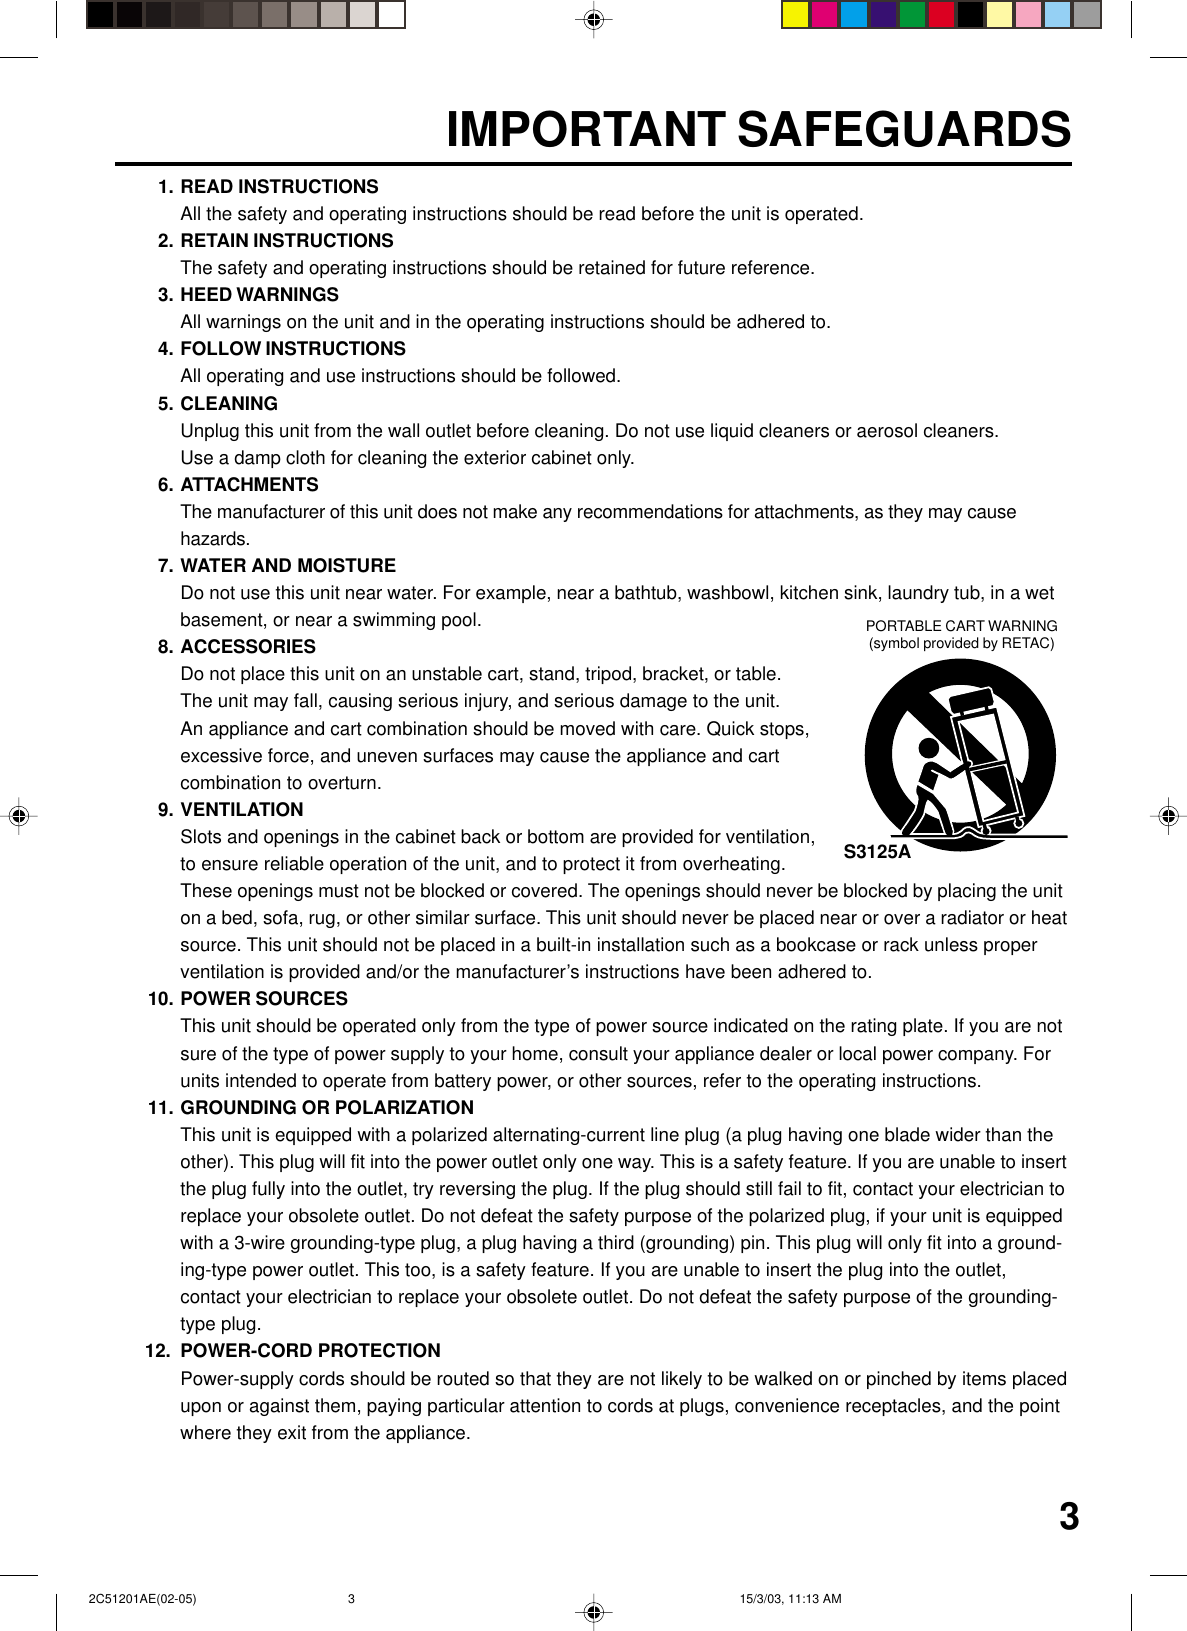 31. READ INSTRUCTIONSAll the safety and operating instructions should be read before the unit is operated.2. RETAIN INSTRUCTIONSThe safety and operating instructions should be retained for future reference.3. HEED WARNINGSAll warnings on the unit and in the operating instructions should be adhered to.4. FOLLOW INSTRUCTIONSAll operating and use instructions should be followed.5. CLEANINGUnplug this unit from the wall outlet before cleaning. Do not use liquid cleaners or aerosol cleaners.Use a damp cloth for cleaning the exterior cabinet only.6. ATTACHMENTSThe manufacturer of this unit does not make any recommendations for attachments, as they may causehazards.7. WATER AND MOISTUREDo not use this unit near water. For example, near a bathtub, washbowl, kitchen sink, laundry tub, in a wetbasement, or near a swimming pool.8. ACCESSORIESDo not place this unit on an unstable cart, stand, tripod, bracket, or table.The unit may fall, causing serious injury, and serious damage to the unit.An appliance and cart combination should be moved with care. Quick stops,excessive force, and uneven surfaces may cause the appliance and cartcombination to overturn.9. VENTILATIONSlots and openings in the cabinet back or bottom are provided for ventilation,to ensure reliable operation of the unit, and to protect it from overheating.These openings must not be blocked or covered. The openings should never be blocked by placing the uniton a bed, sofa, rug, or other similar surface. This unit should never be placed near or over a radiator or heatsource. This unit should not be placed in a built-in installation such as a bookcase or rack unless properventilation is provided and/or the manufacturer’s instructions have been adhered to.10. POWER SOURCESThis unit should be operated only from the type of power source indicated on the rating plate. If you are notsure of the type of power supply to your home, consult your appliance dealer or local power company. Forunits intended to operate from battery power, or other sources, refer to the operating instructions.11. GROUNDING OR POLARIZATIONThis unit is equipped with a polarized alternating-current line plug (a plug having one blade wider than theother). This plug will fit into the power outlet only one way. This is a safety feature. If you are unable to insertthe plug fully into the outlet, try reversing the plug. If the plug should still fail to fit, contact your electrician toreplace your obsolete outlet. Do not defeat the safety purpose of the polarized plug, if your unit is equippedwith a 3-wire grounding-type plug, a plug having a third (grounding) pin. This plug will only fit into a ground-ing-type power outlet. This too, is a safety feature. If you are unable to insert the plug into the outlet,contact your electrician to replace your obsolete outlet. Do not defeat the safety purpose of the grounding-type plug.12. POWER-CORD PROTECTIONPower-supply cords should be routed so that they are not likely to be walked on or pinched by items placedupon or against them, paying particular attention to cords at plugs, convenience receptacles, and the pointwhere they exit from the appliance.S3125APORTABLE CART WARNING(symbol provided by RETAC)IMPORTANT SAFEGUARDS 2C51201AE(02-05) 15/3/03, 11:13 AM3